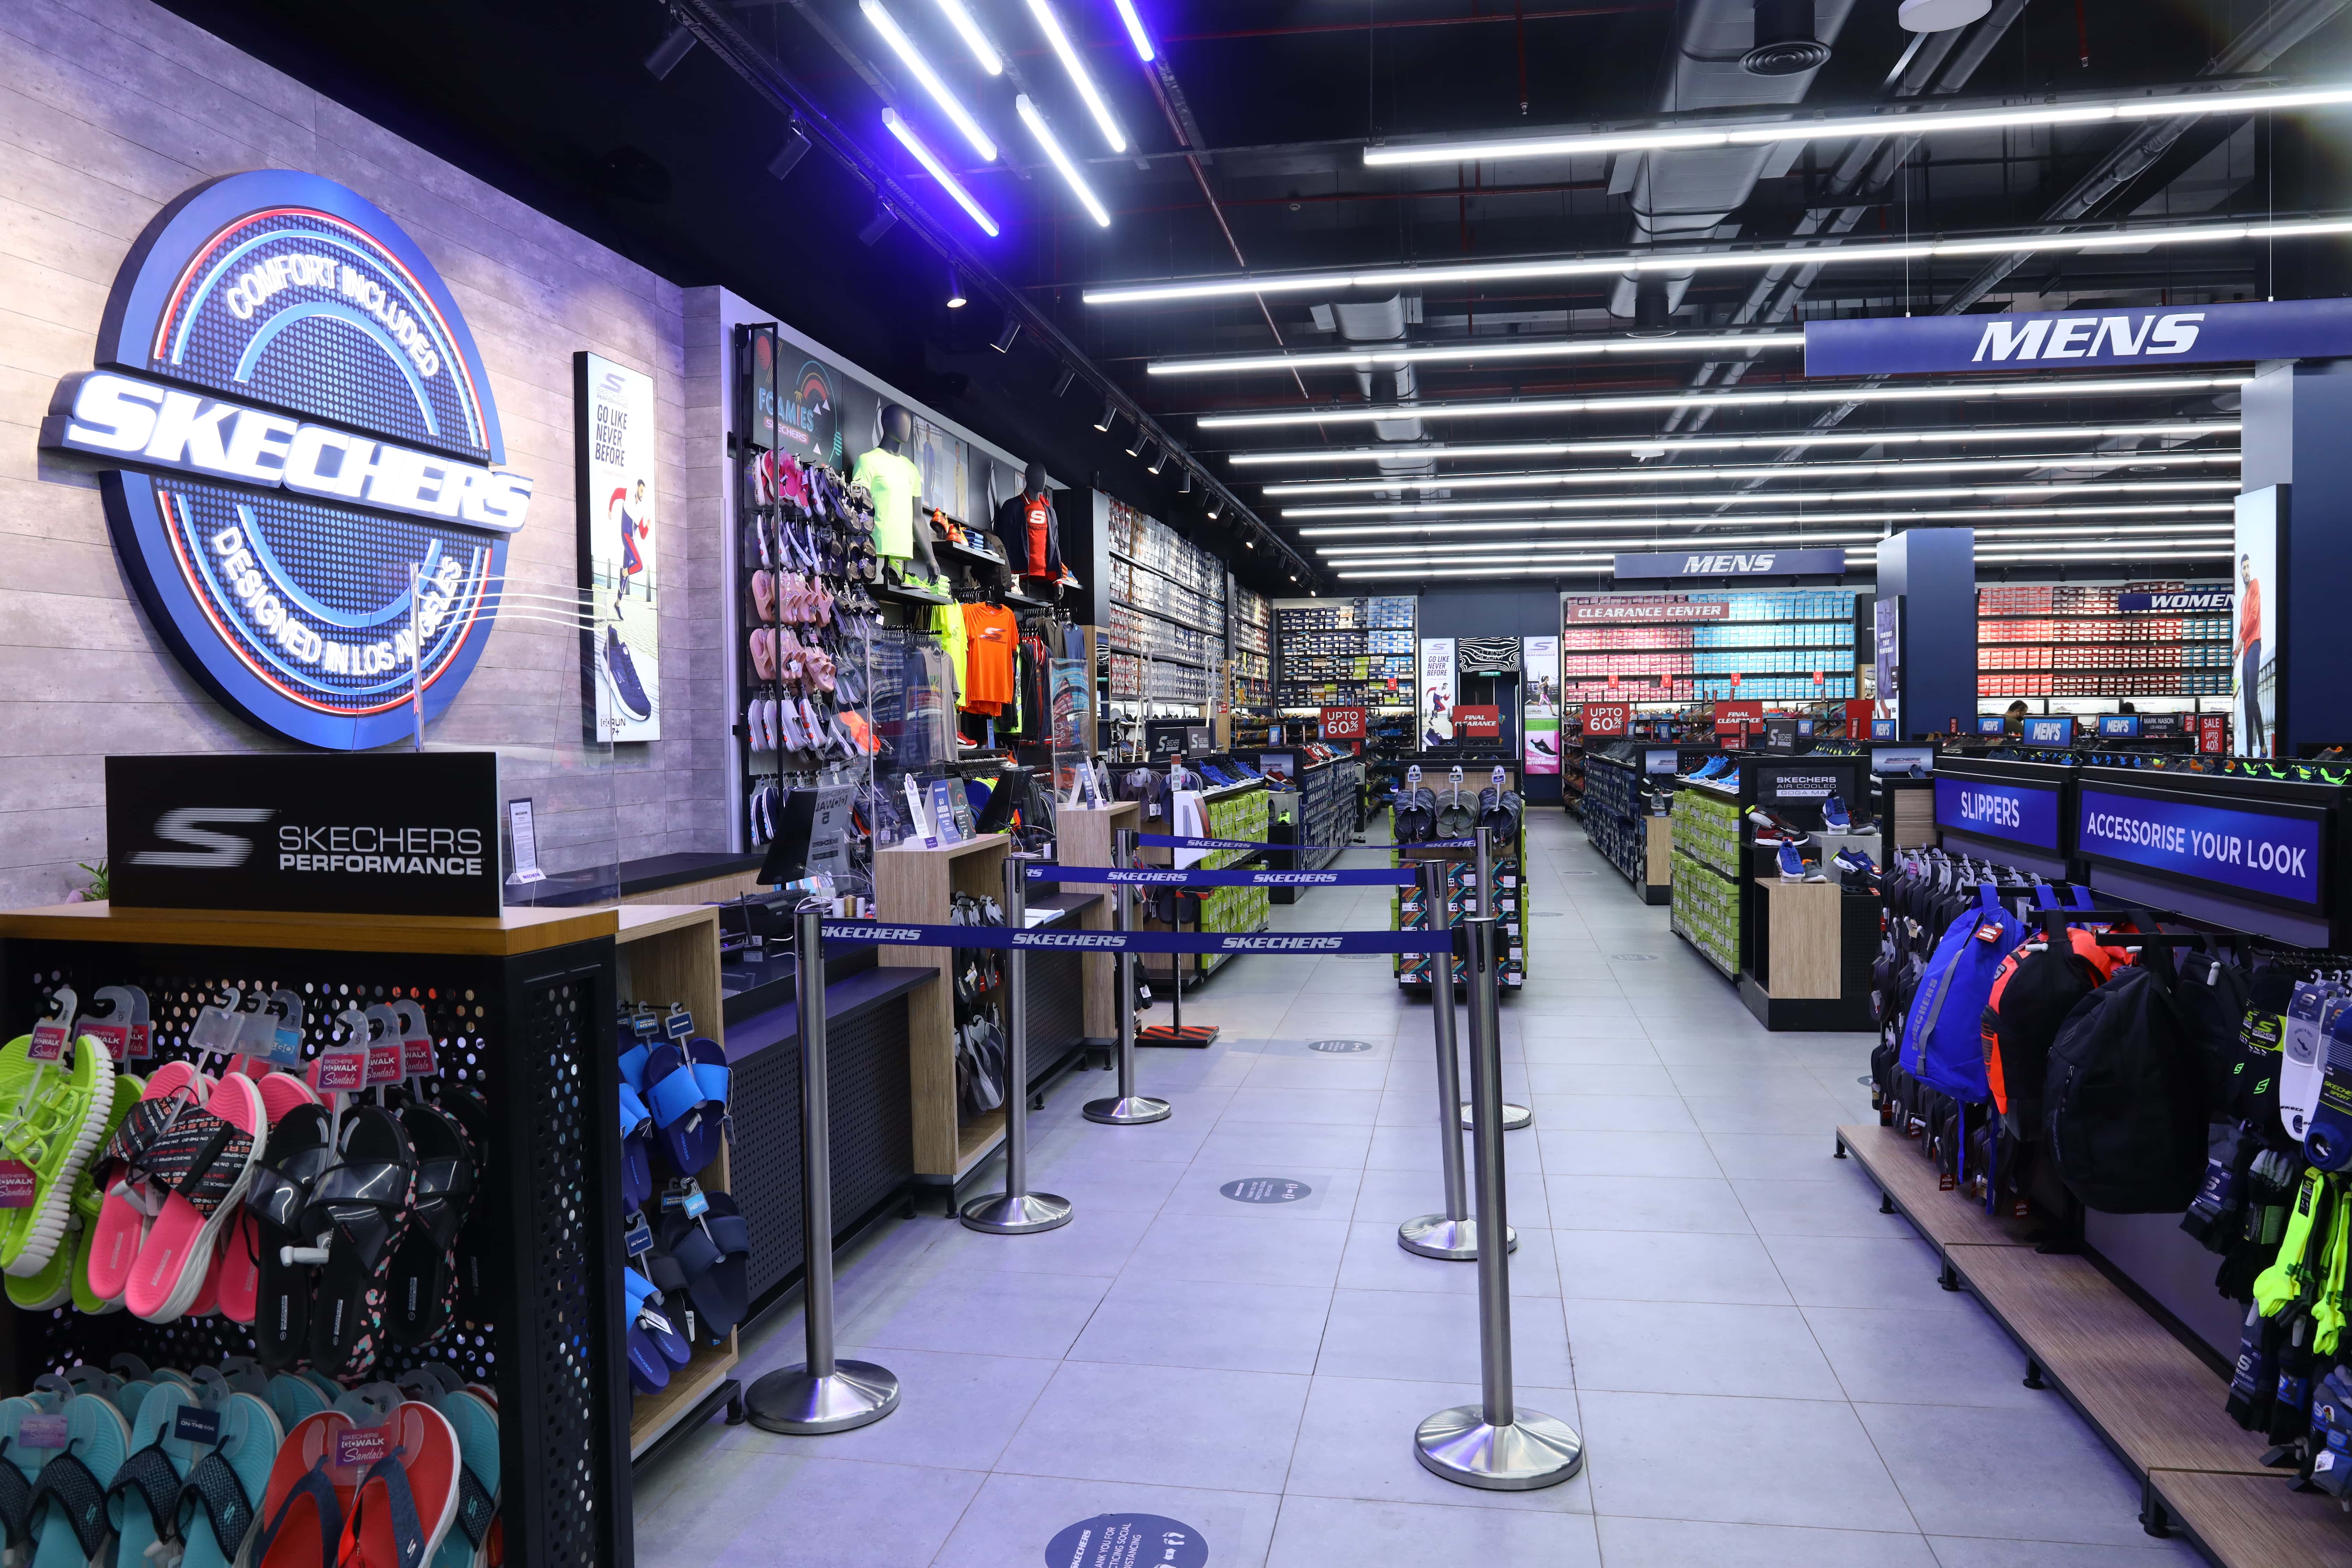 Skechers India Stores SAVE - mpgc.net